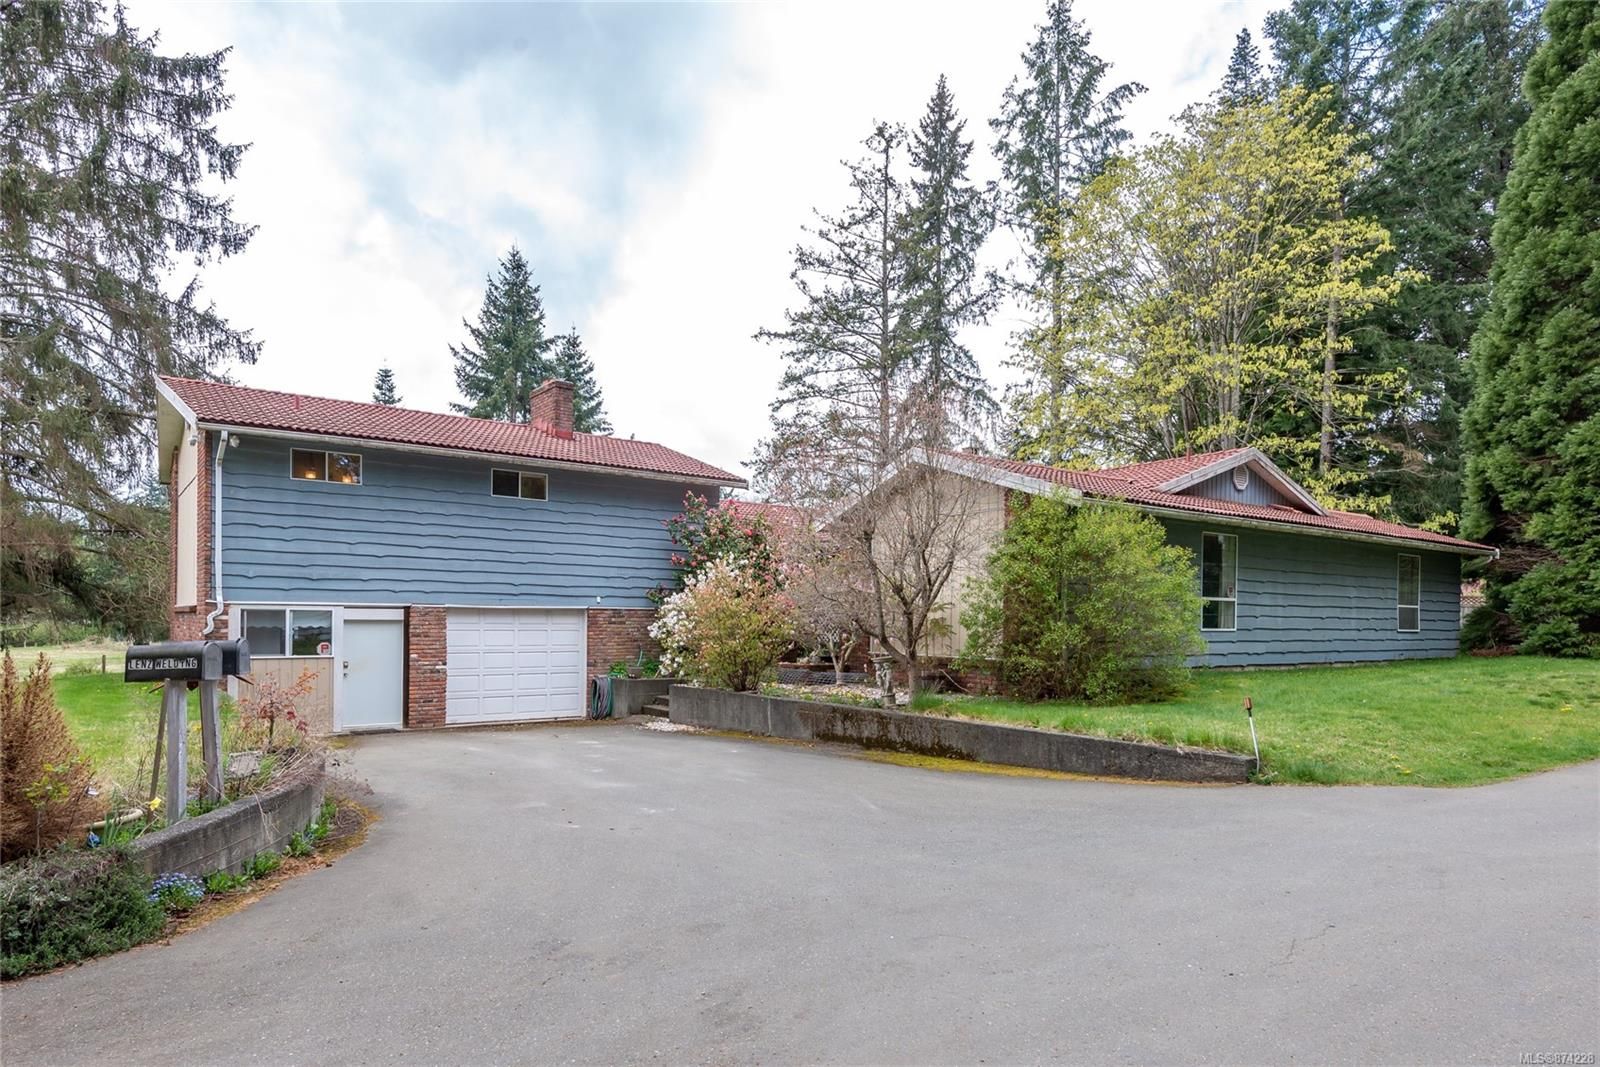 I have sold a property at 2261 Terrain Rd
